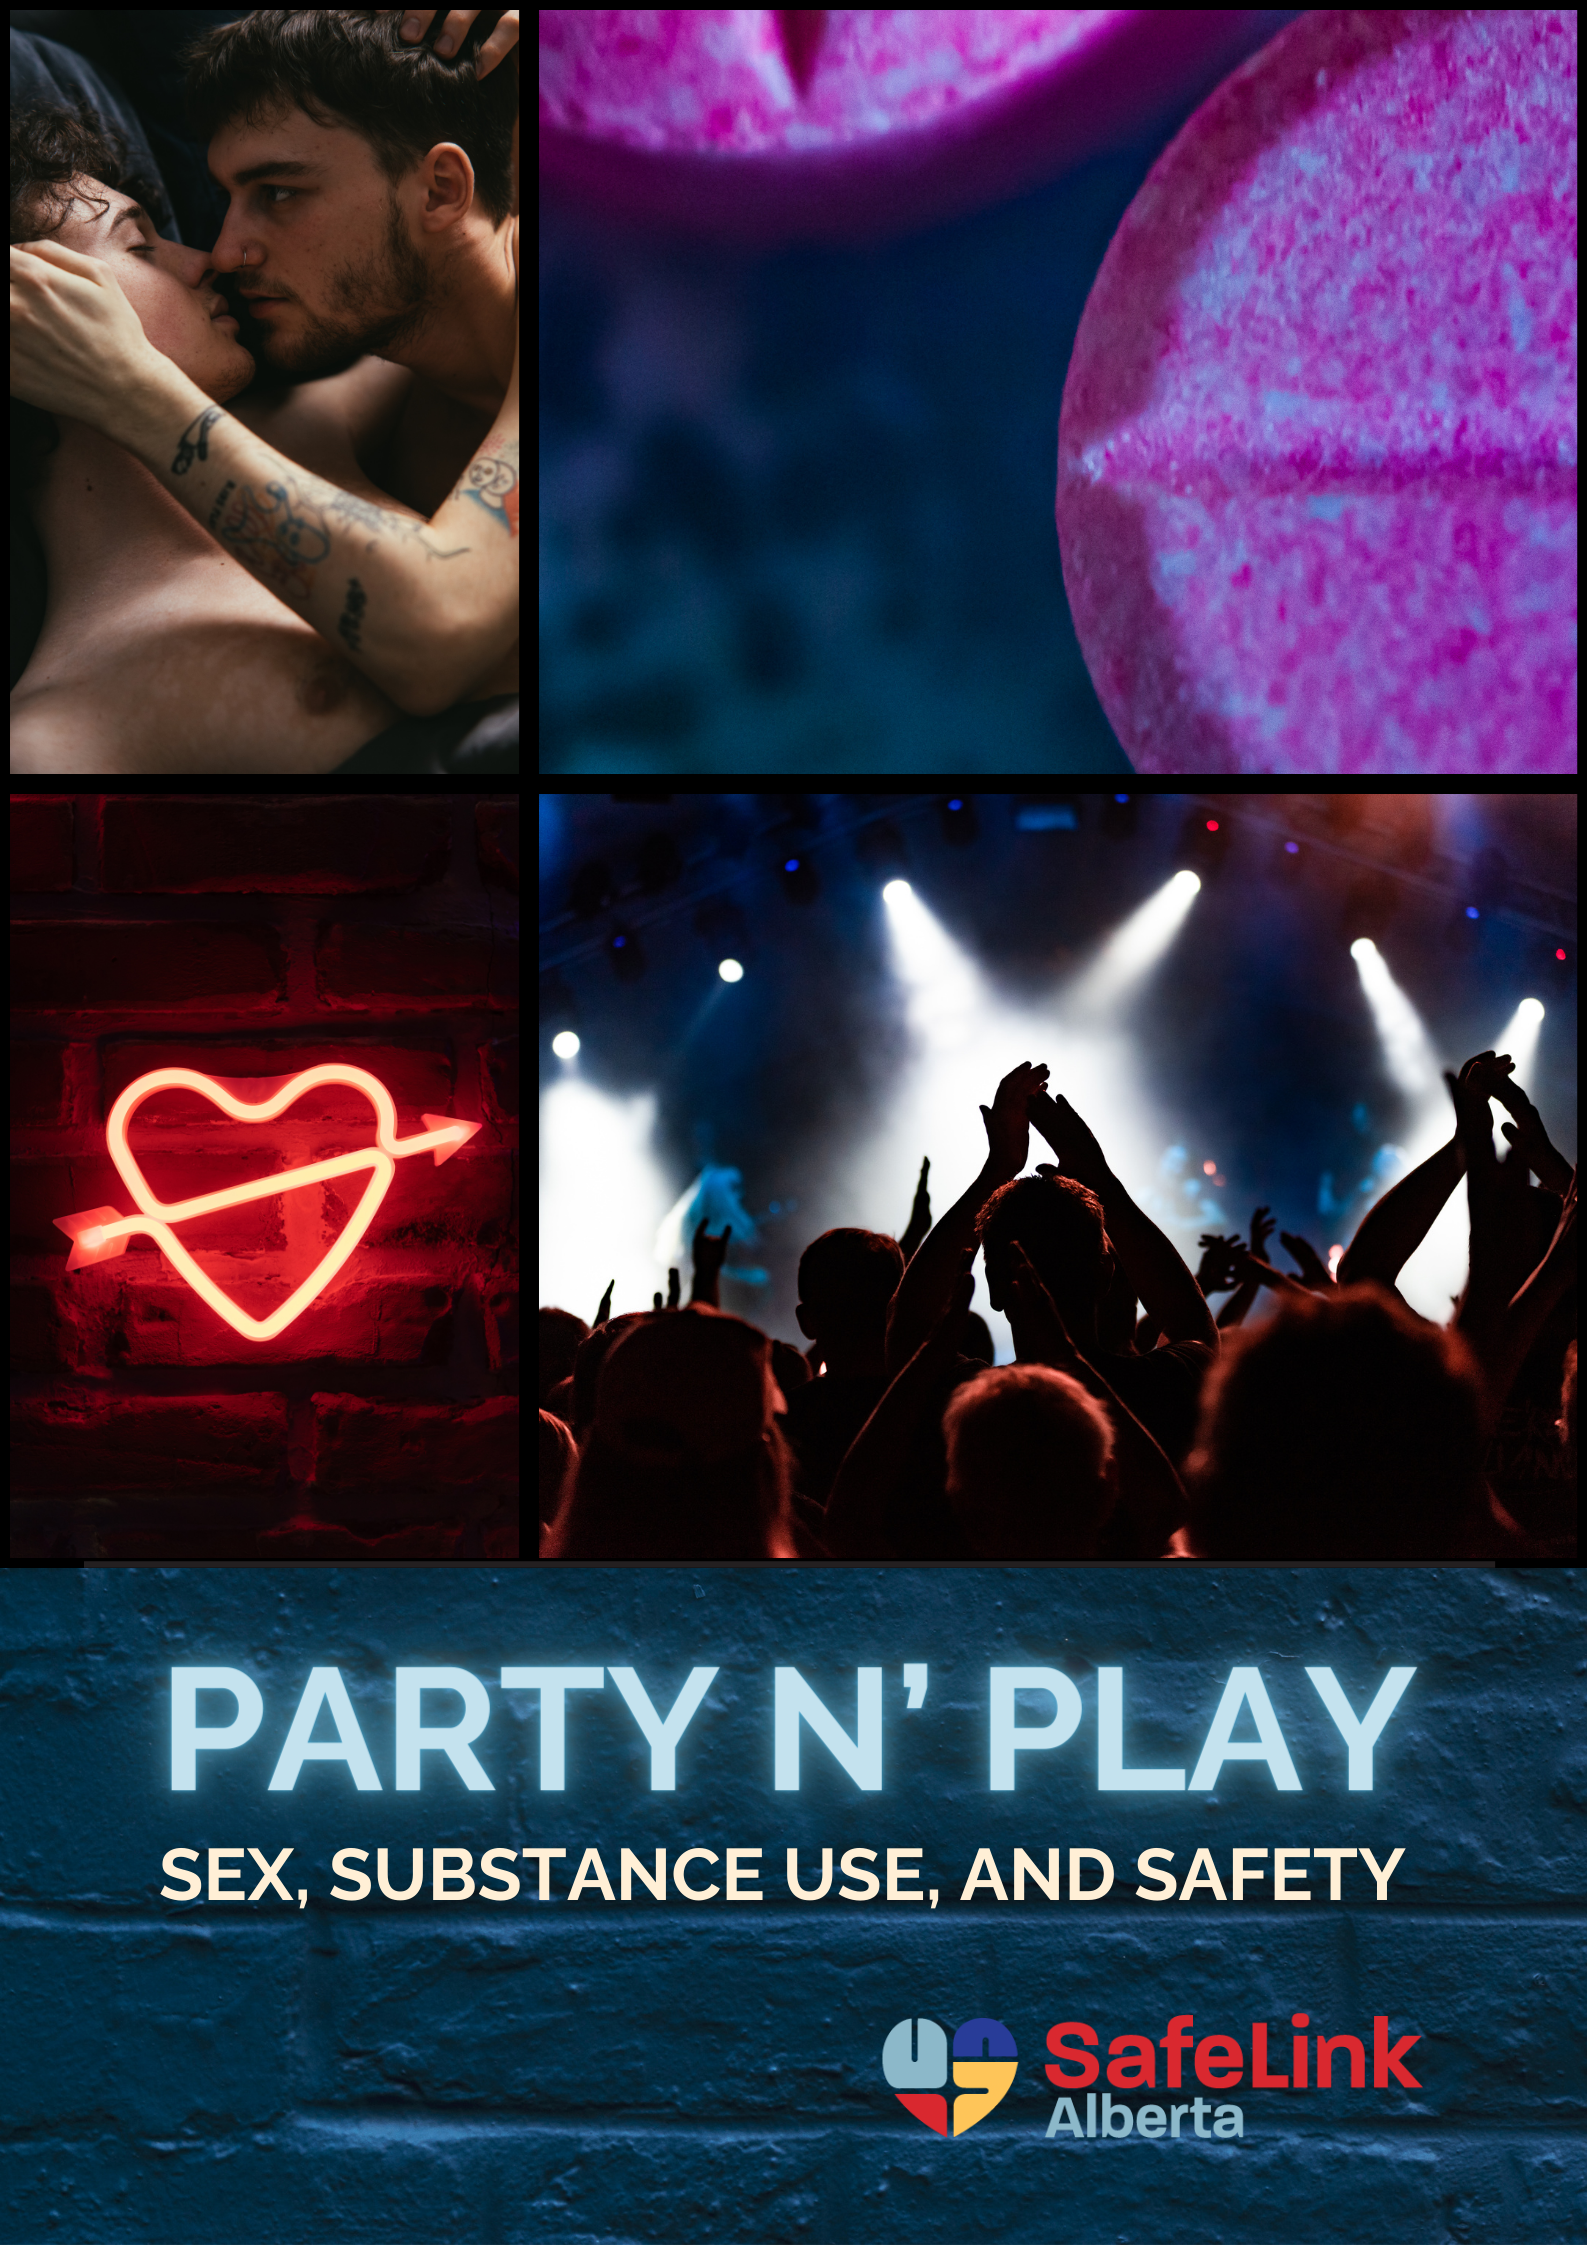 Cover of Party N' Play Toolkit. Has a cool, edgy theme with brick and neon lights. Four pictures of two young men kissing, pills, a neon sign, and people at a club take up the first half of the image. The second half shows title text "Party N' Play: Sex, Substance Use, and Safety"